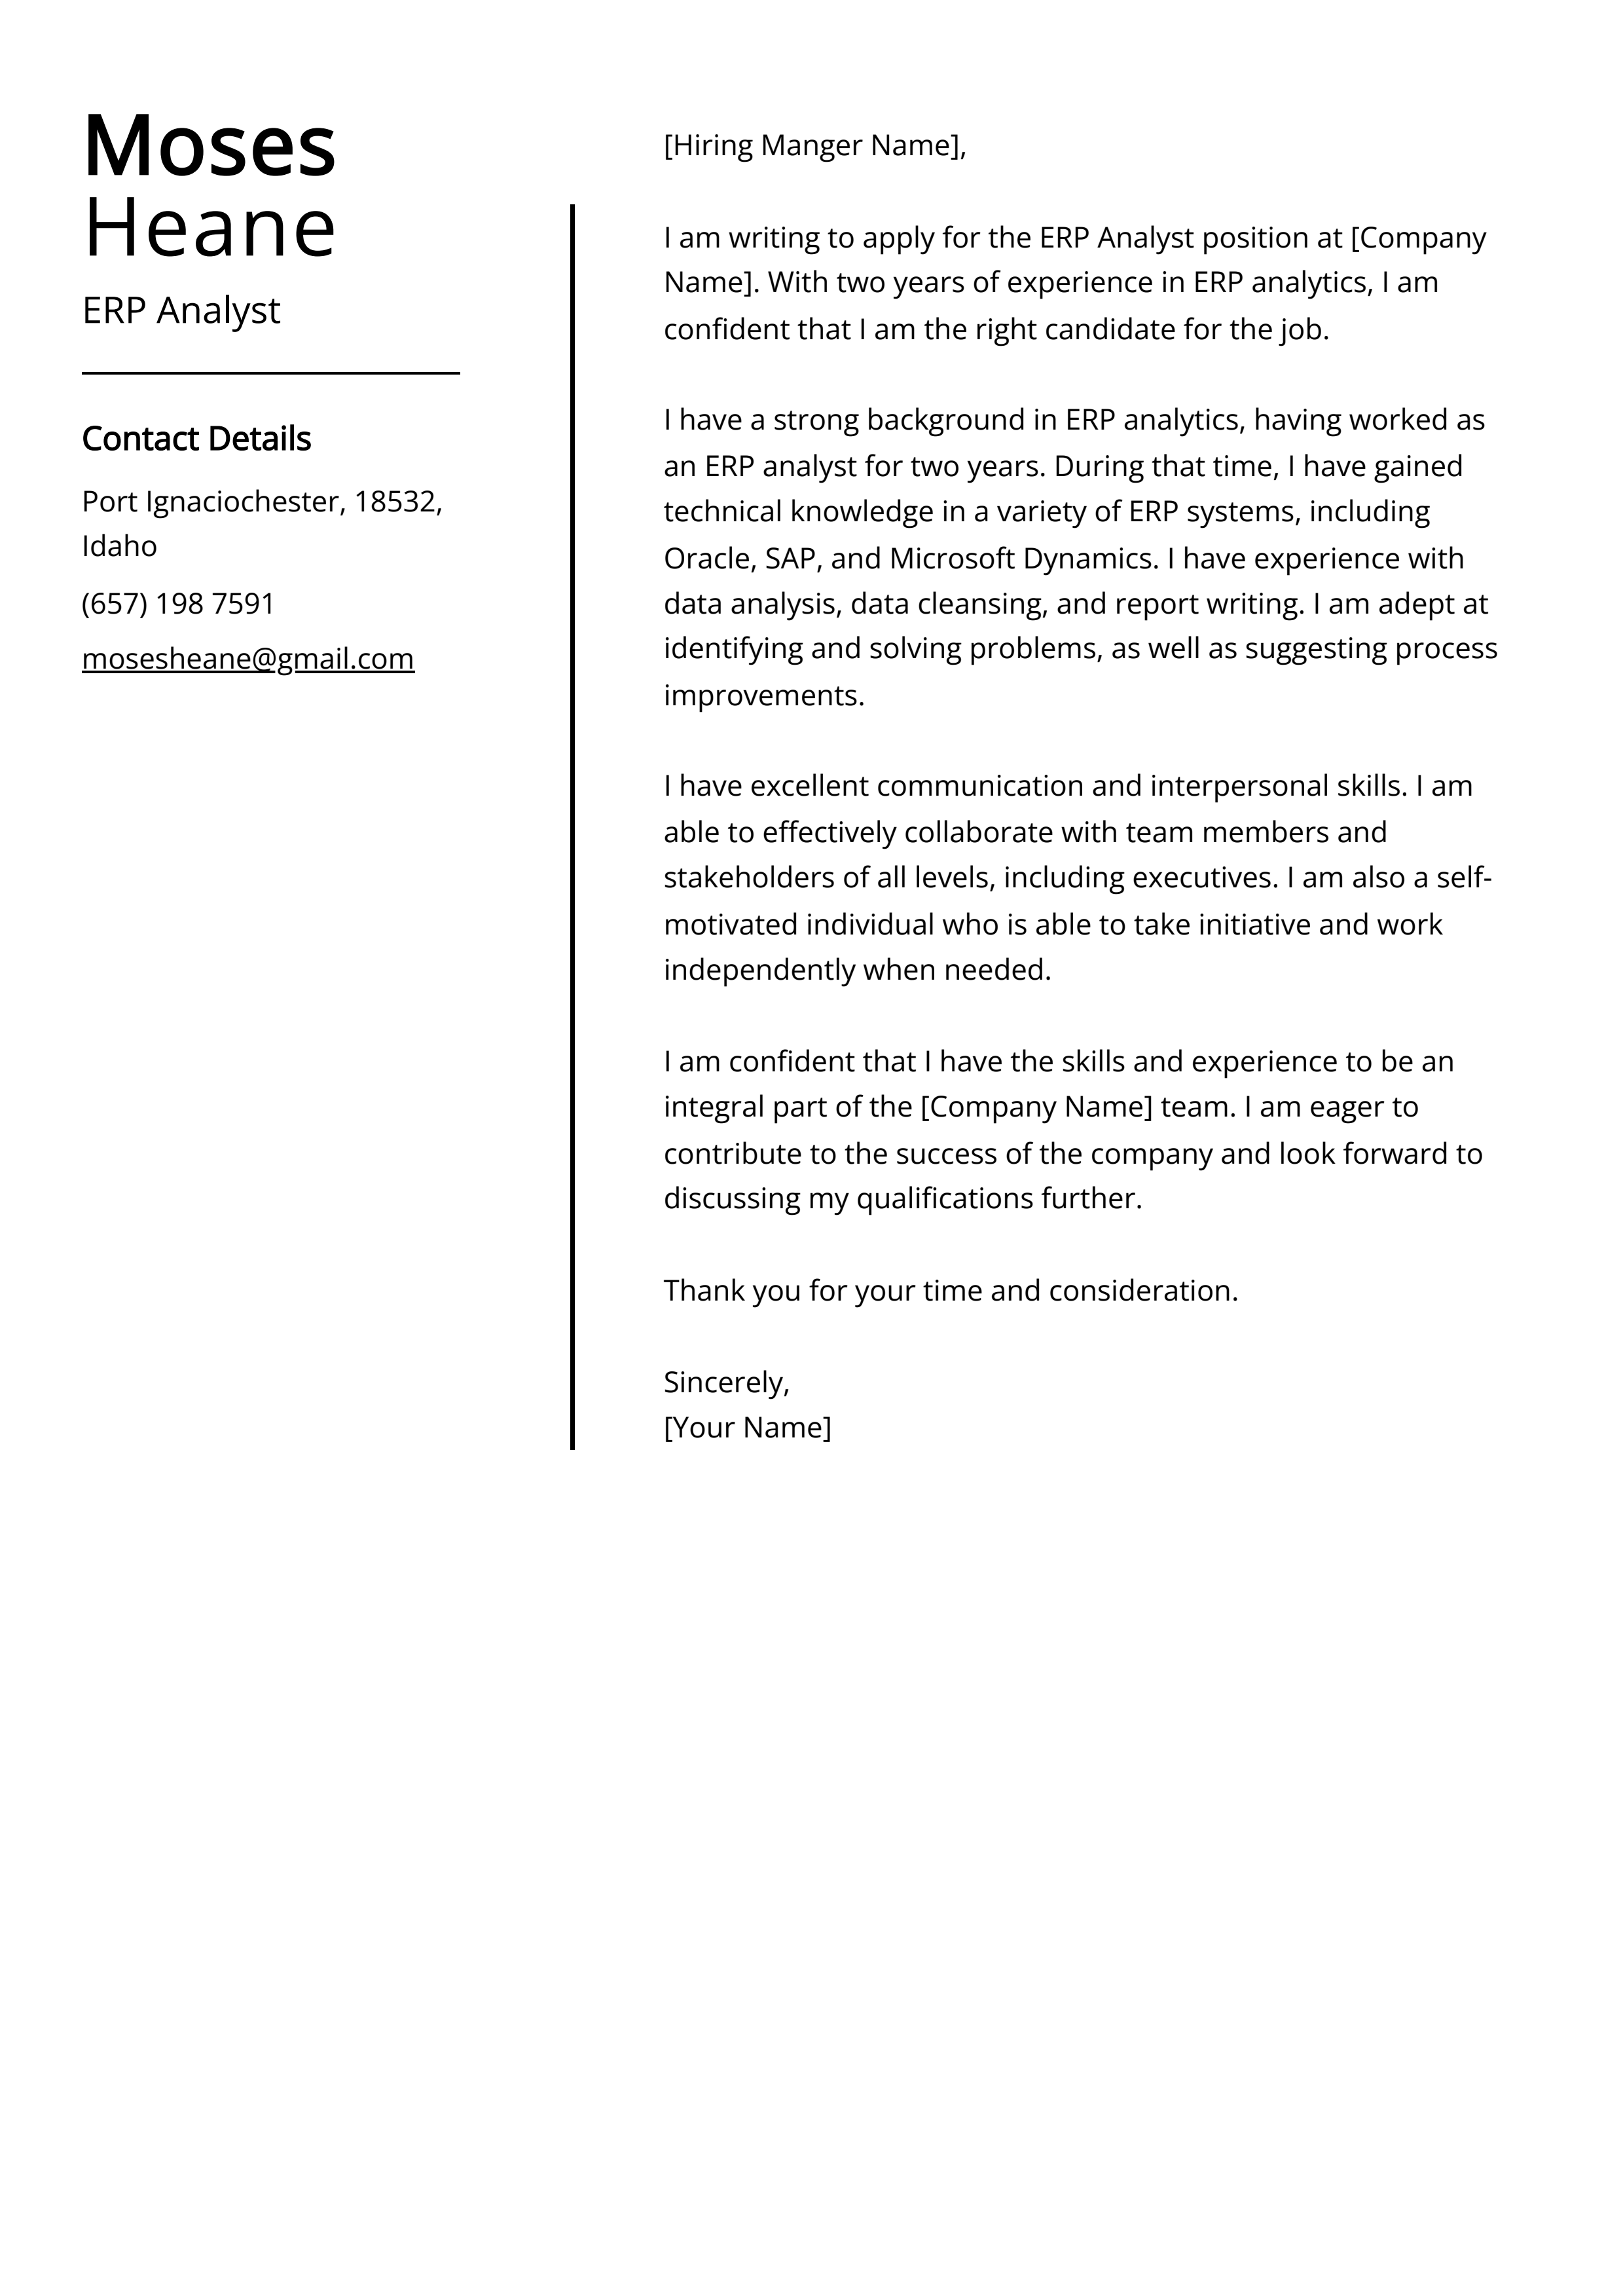 ERP Analyst Cover Letter Example